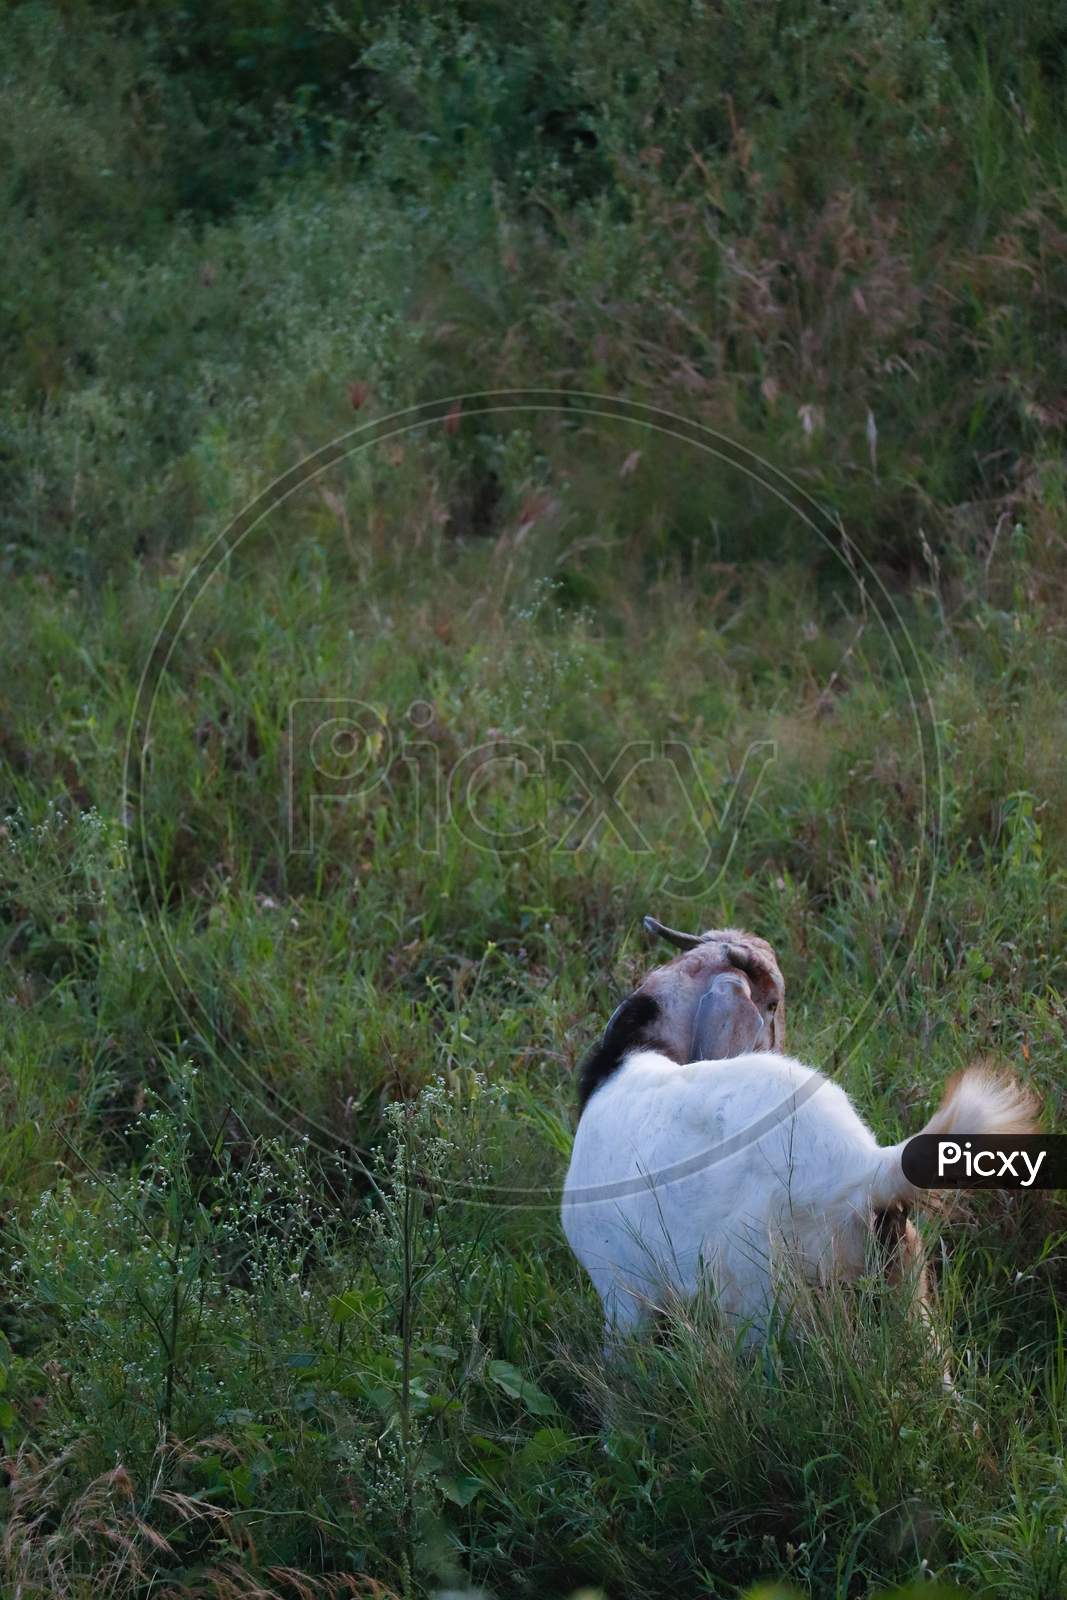 Goat standing in grass